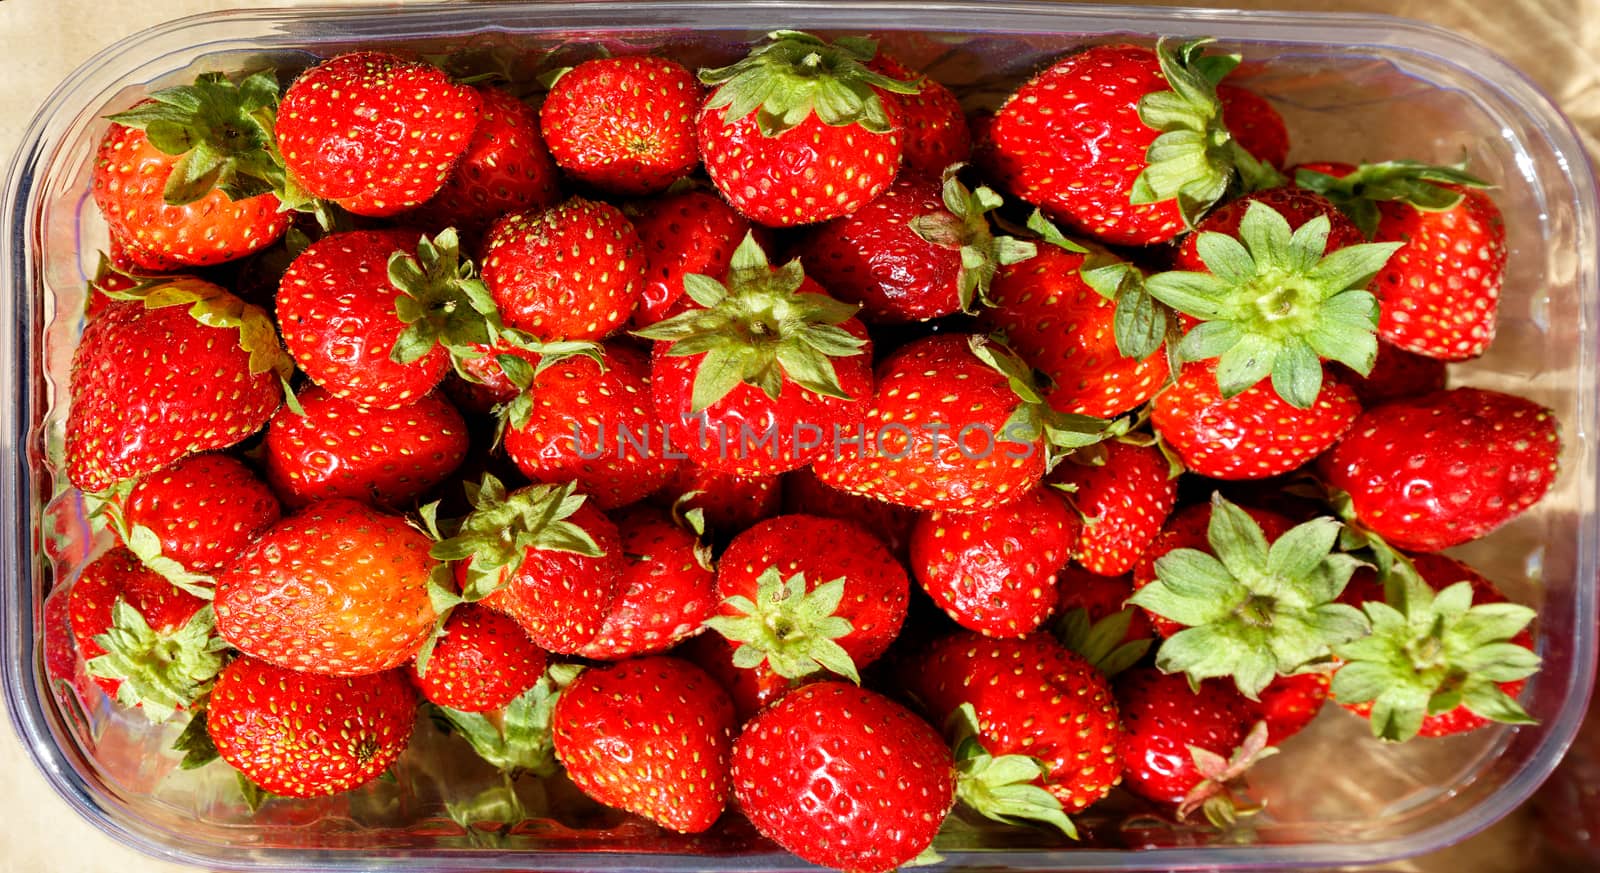 Red ripe strawberries lie in plastic containers and are sold in street markets, top view.